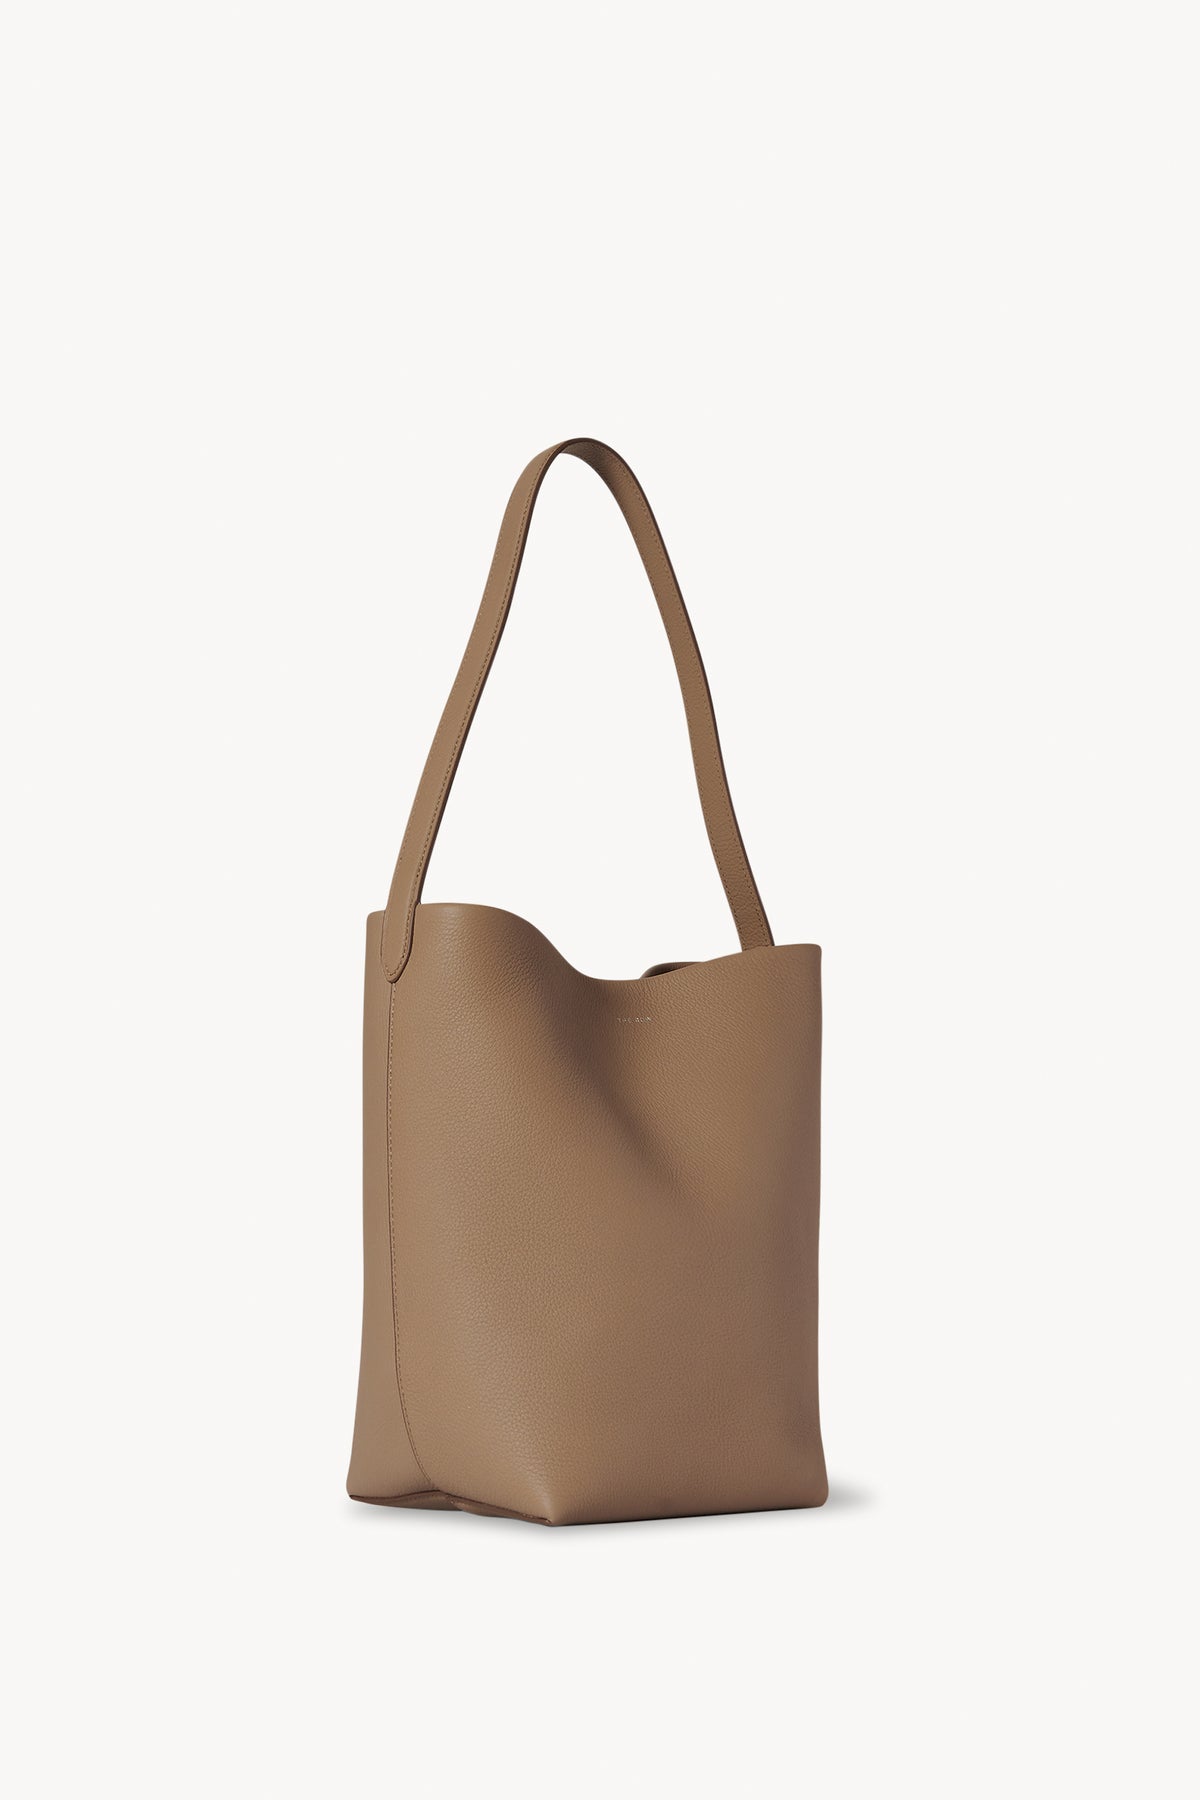 The Row Beige & Taupe Park Tote - ShopStyle